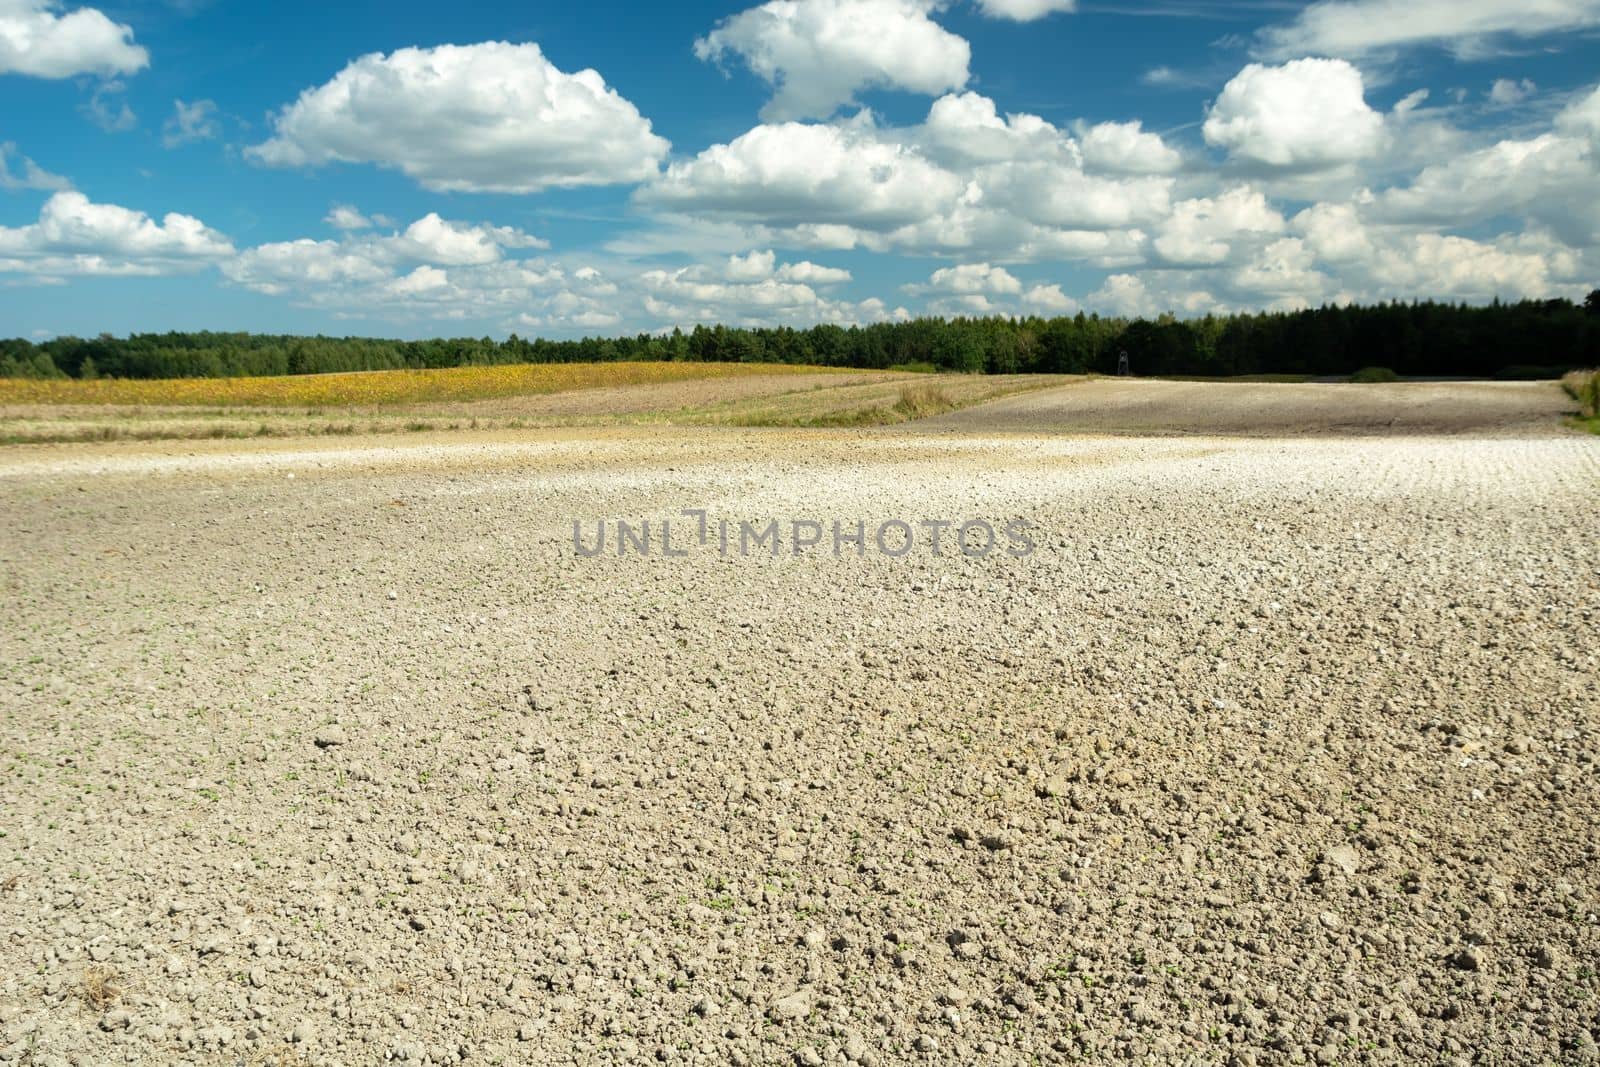 Dry ground on a plowed field in front of a forest and clouds on the sky, summer rural landscape